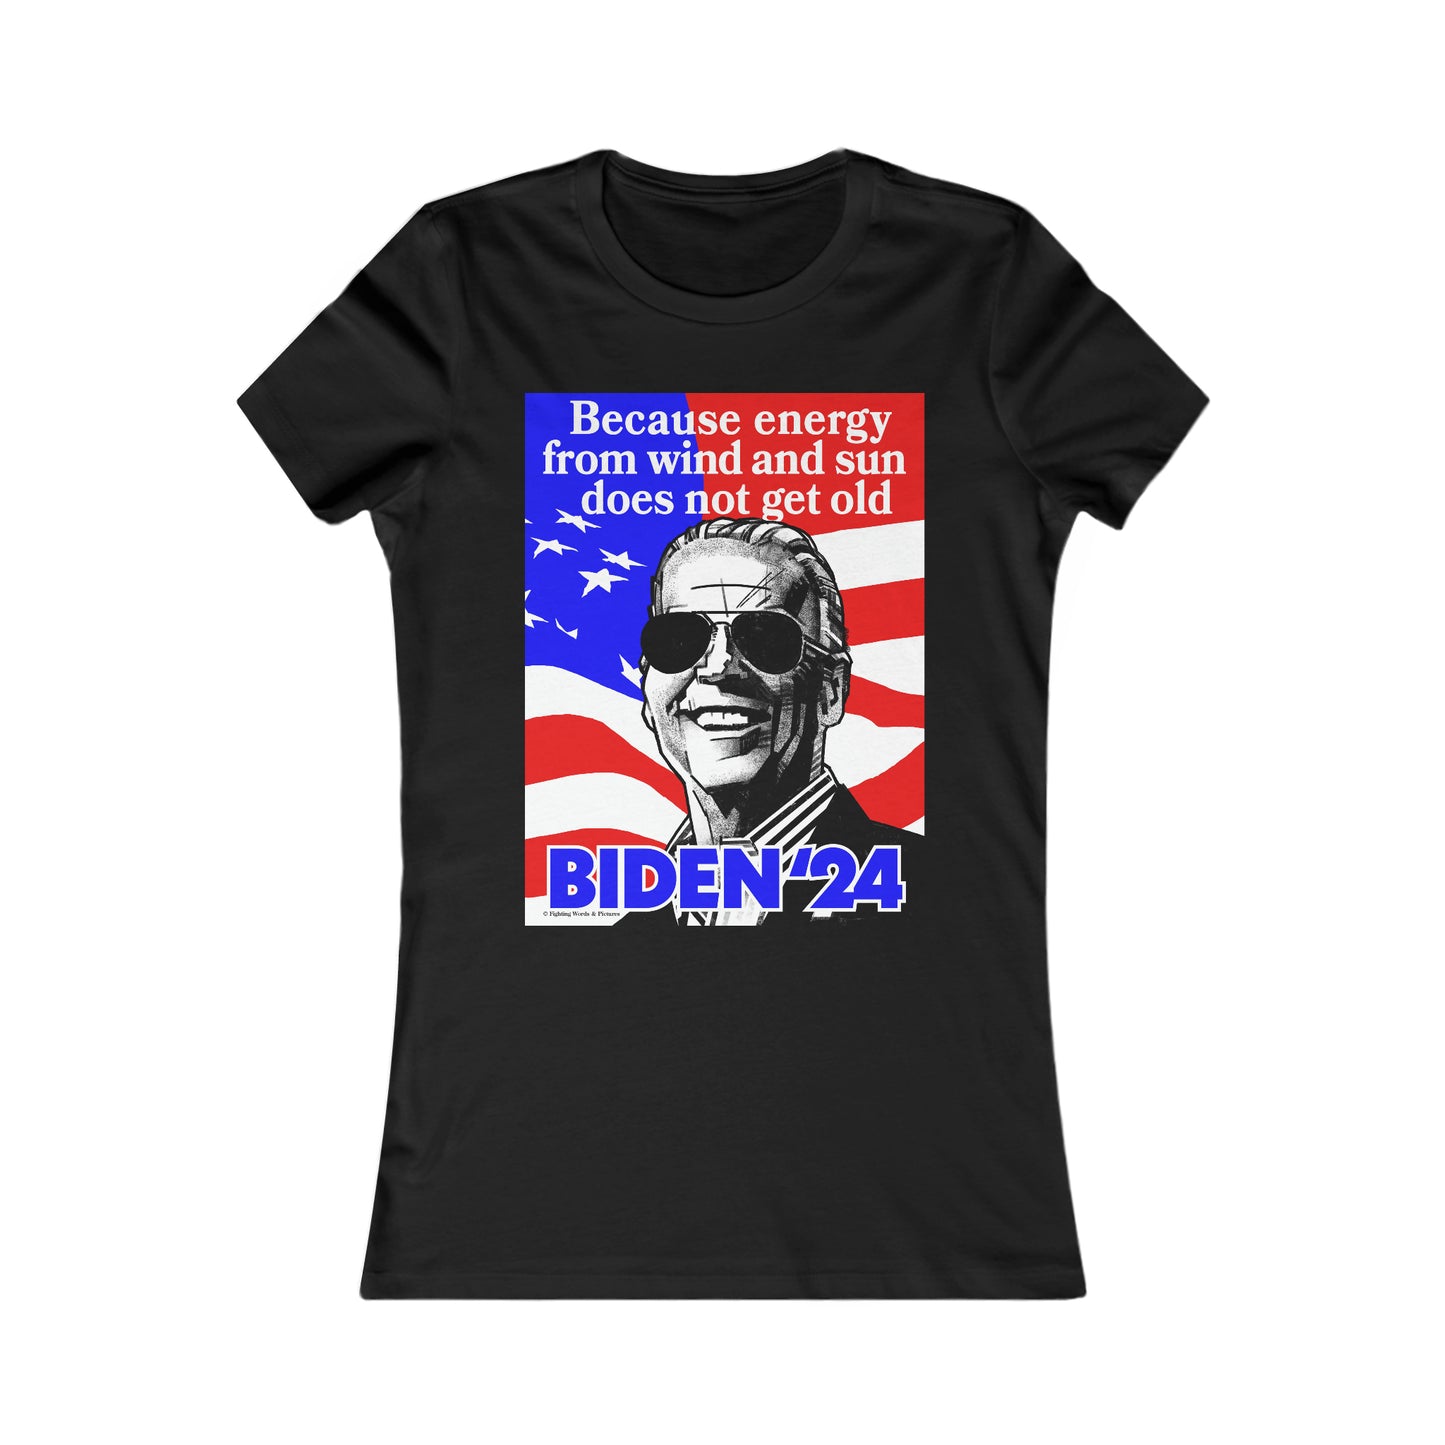 Because energy from wind and sun does not get old BIDEN'24 Women's Favorite Tee